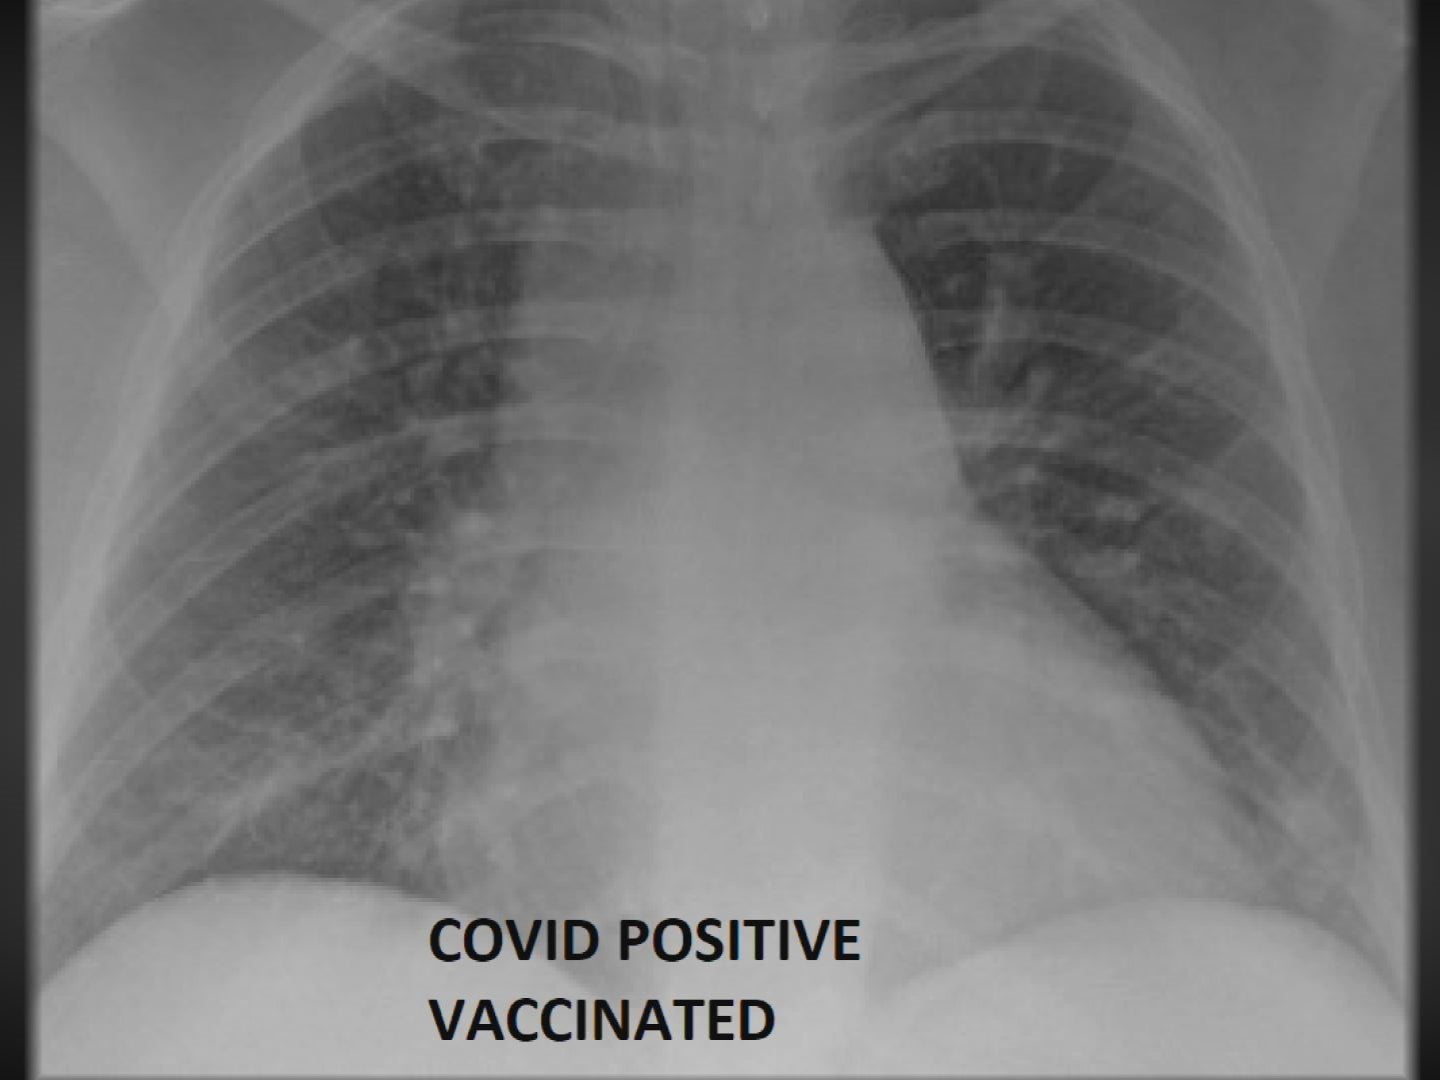 The x-ray image of the vaccinated individual infected with Covid-19 is a rare breakthrough case – less than one per cent of vaccinated people have been infected.